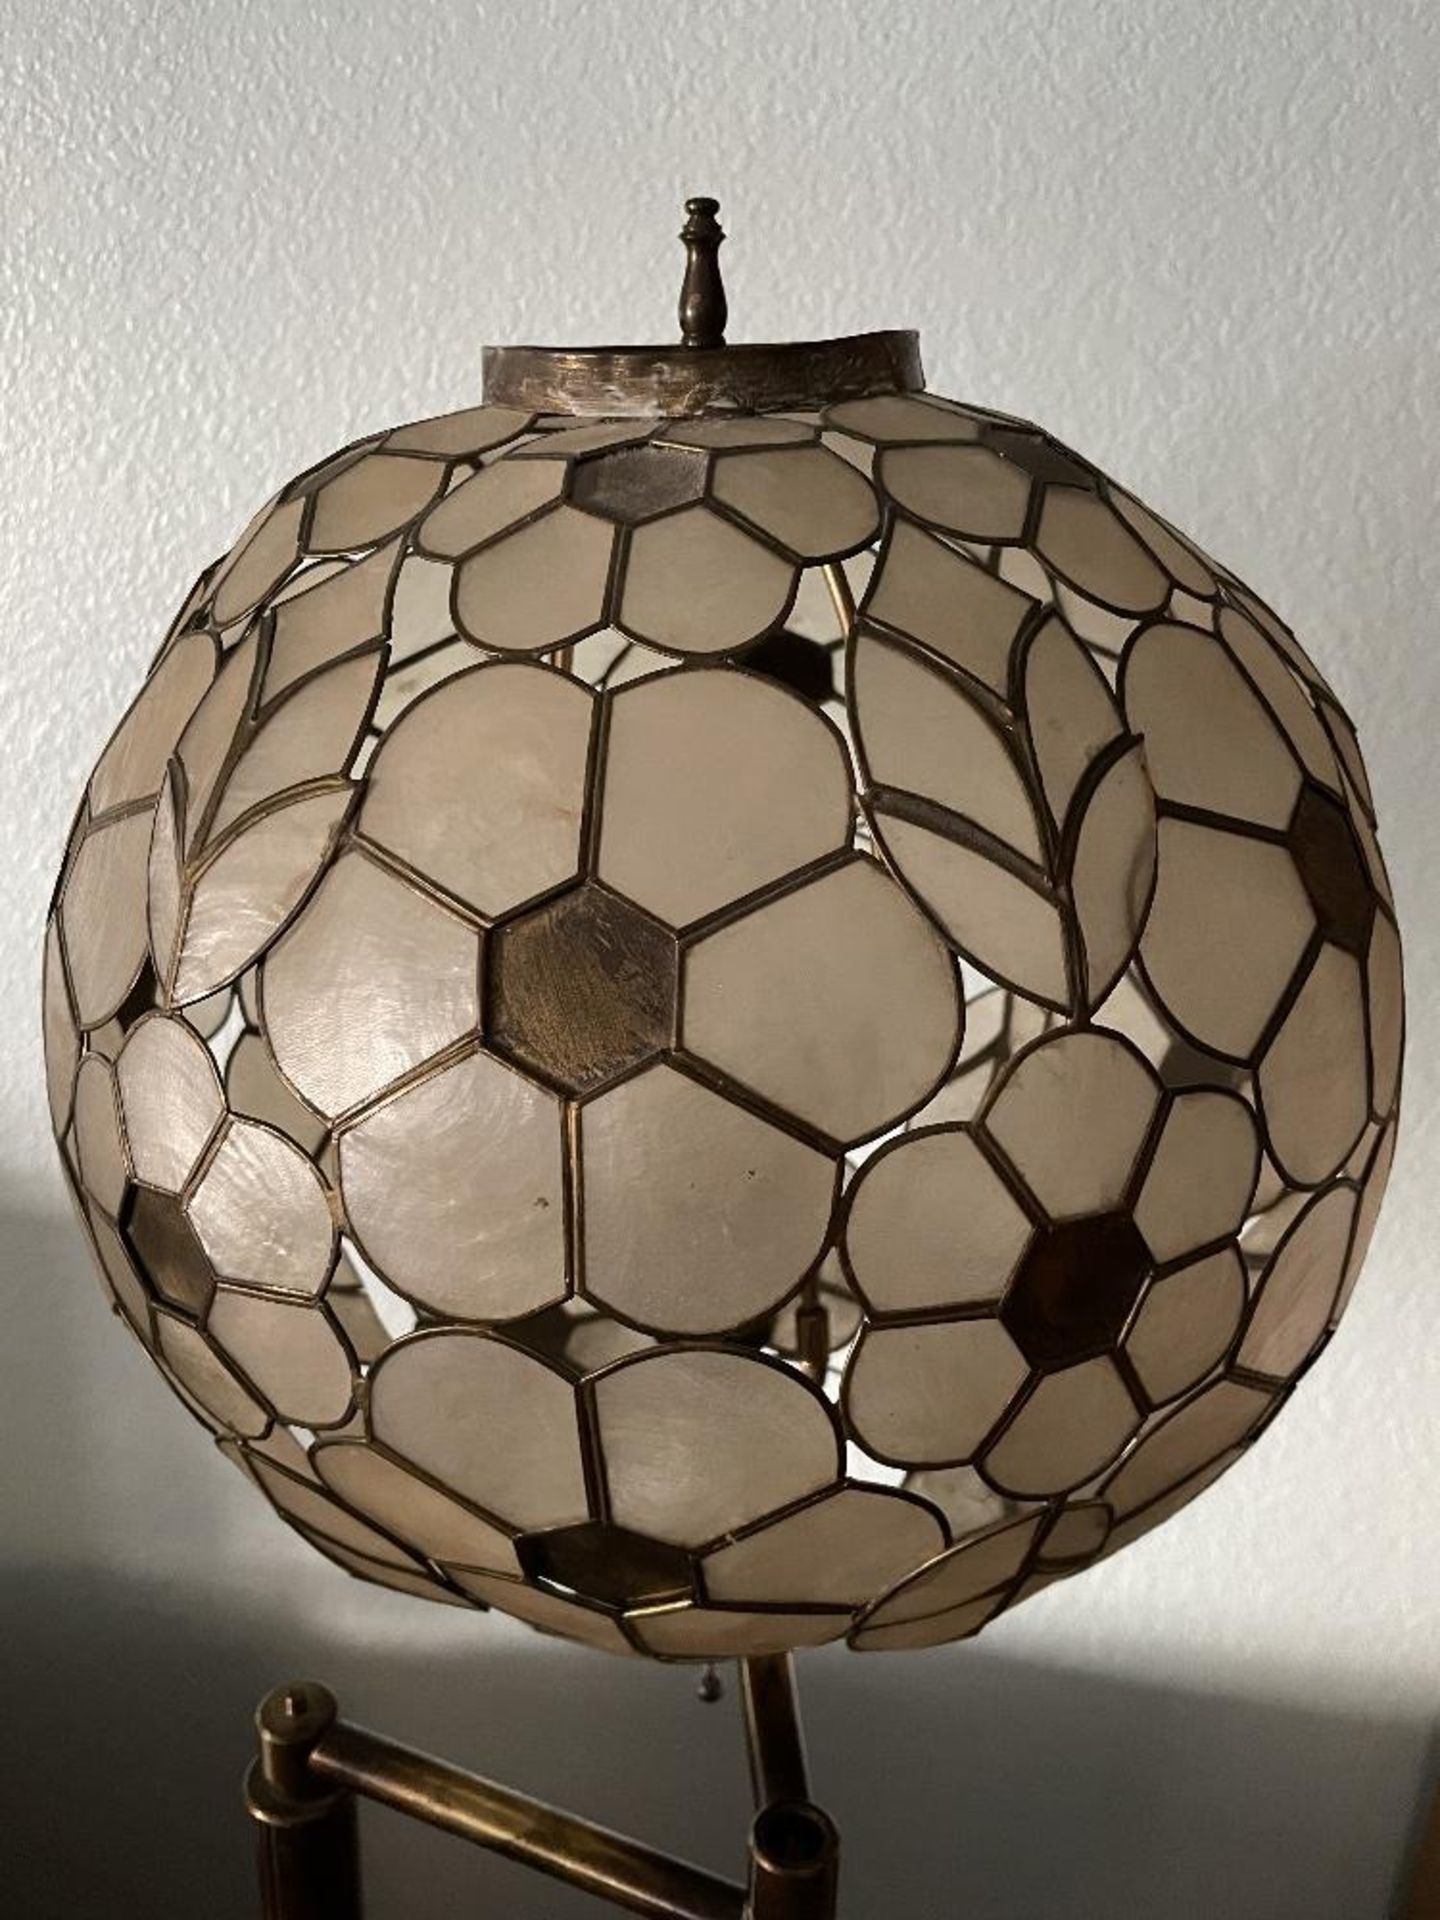 Antique Tortoise Shell Lamp in Brass Finish, approx 5' Tall. Very Rare/Unique. - Image 5 of 11